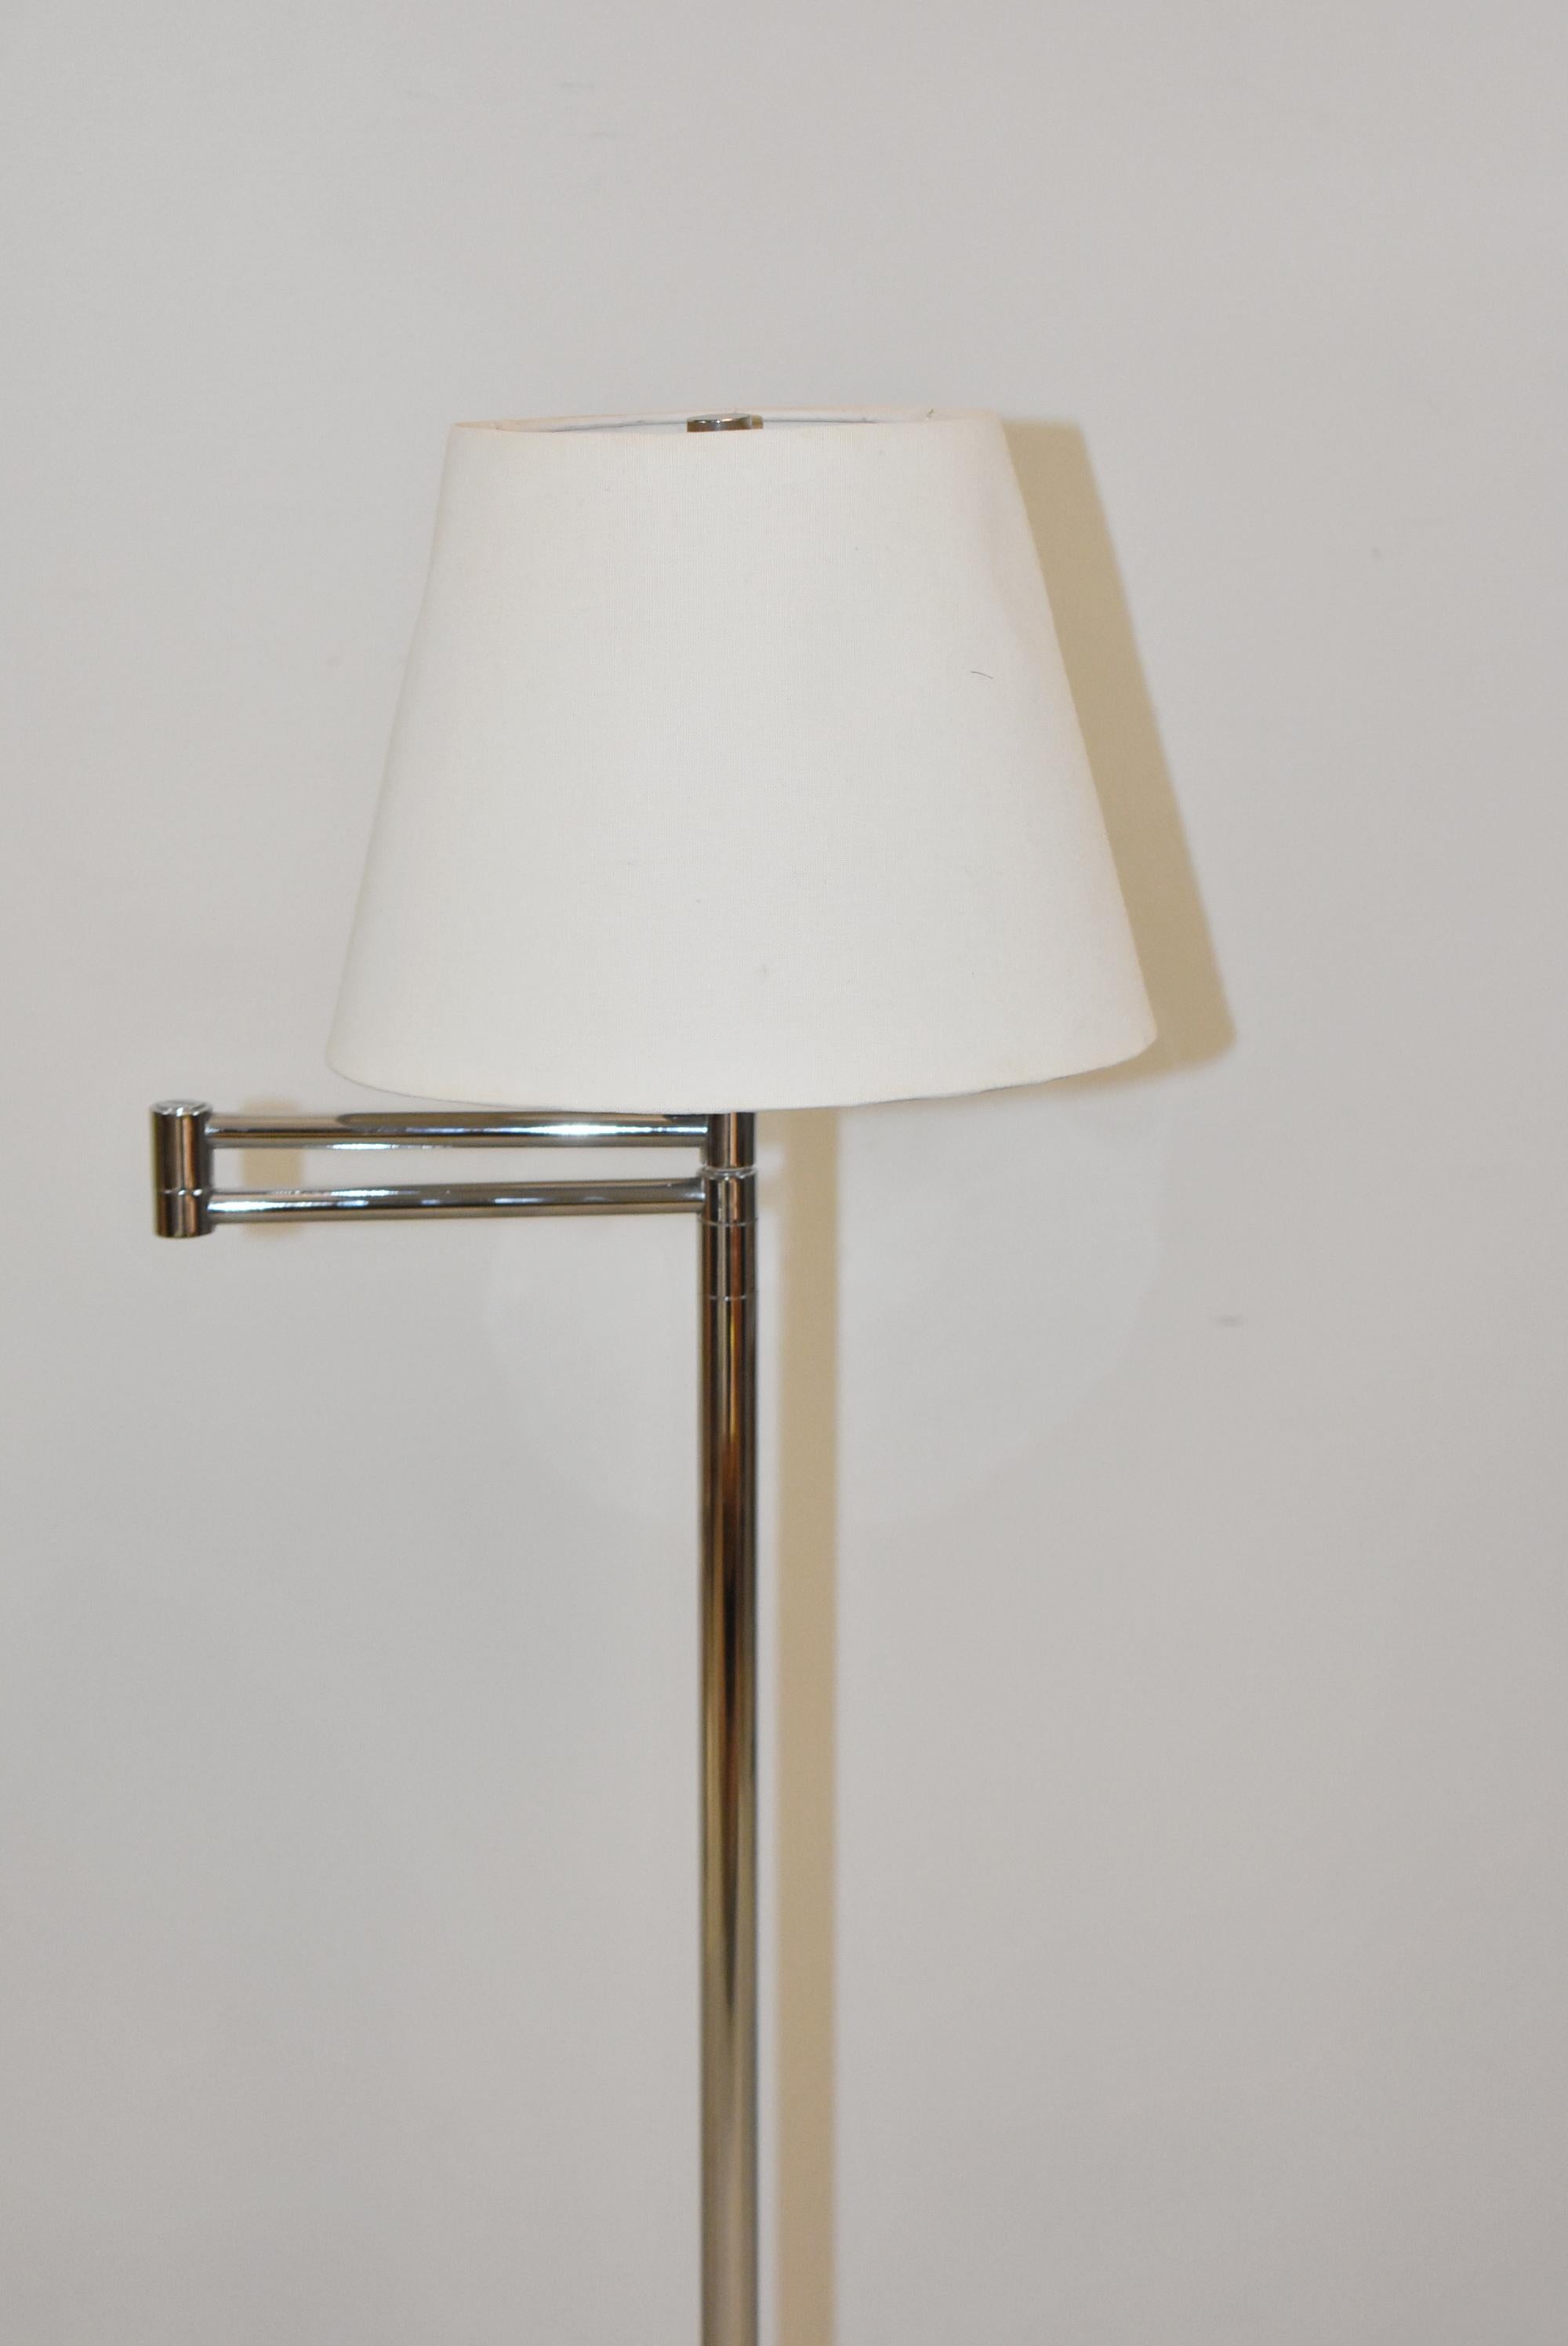 Pair of vintage chrome finished swing arm floor lamps by Paul Hansen of New York. 52